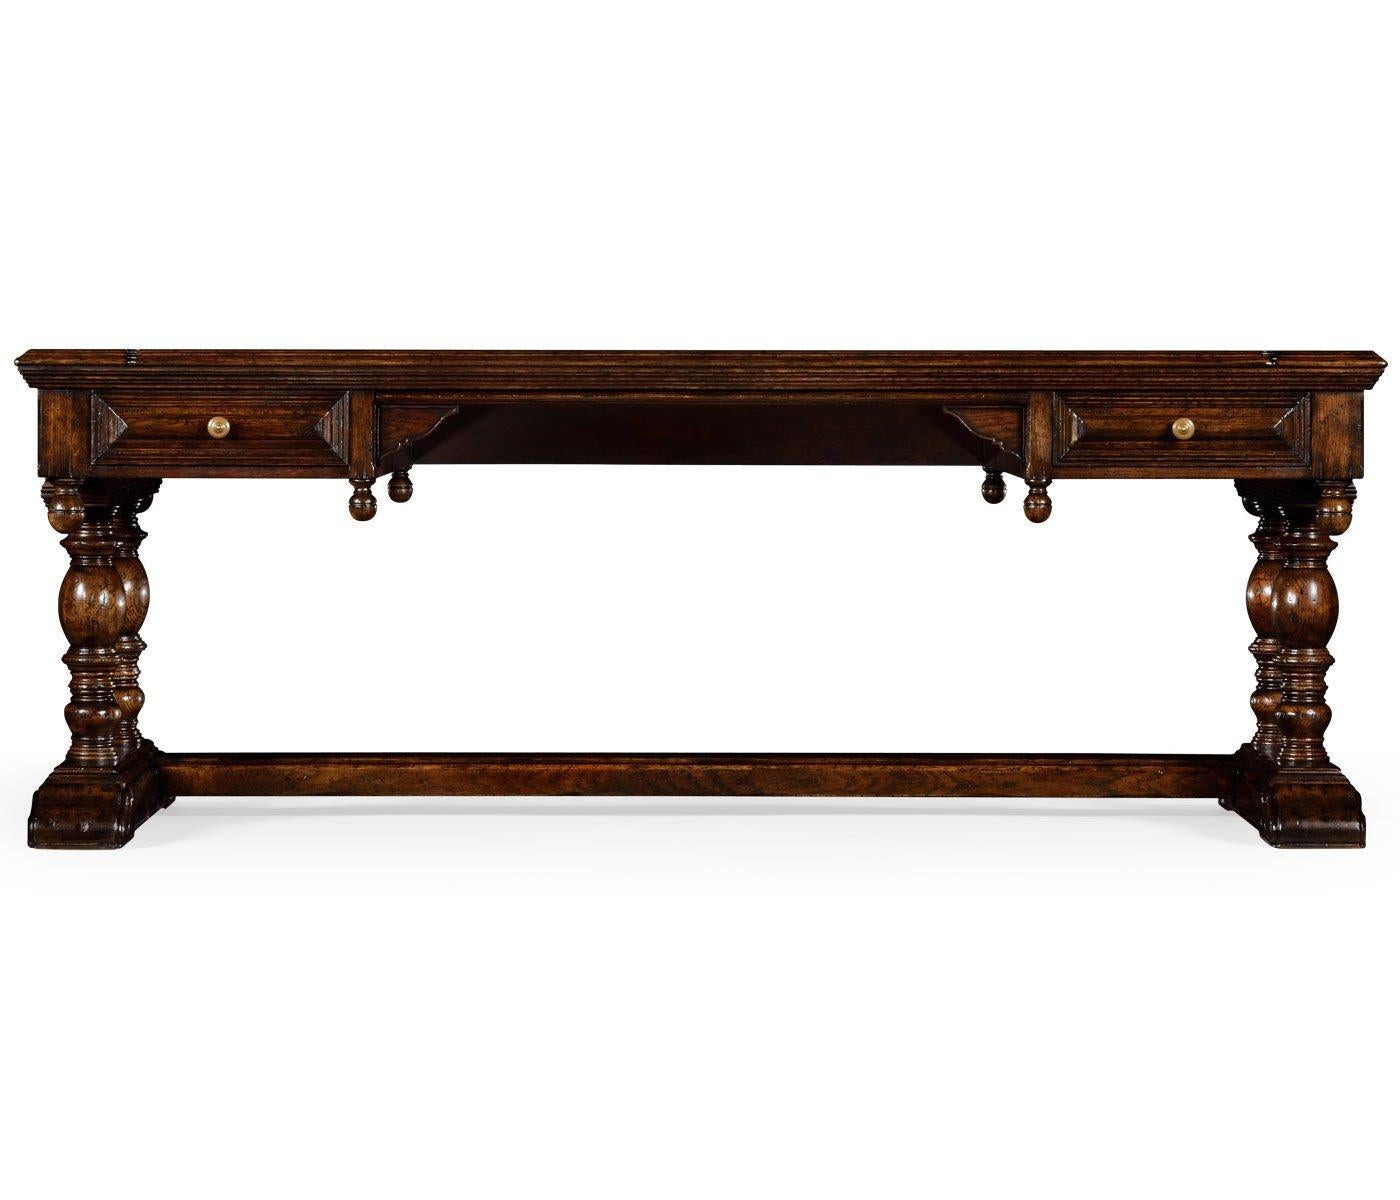 Large Elizabethan style dark oak distressed desk panelled sides and drawers, turned pendants, exposed butterfly joints to the top and an H-stretcher with carved volute feet.
Dimensions: 82